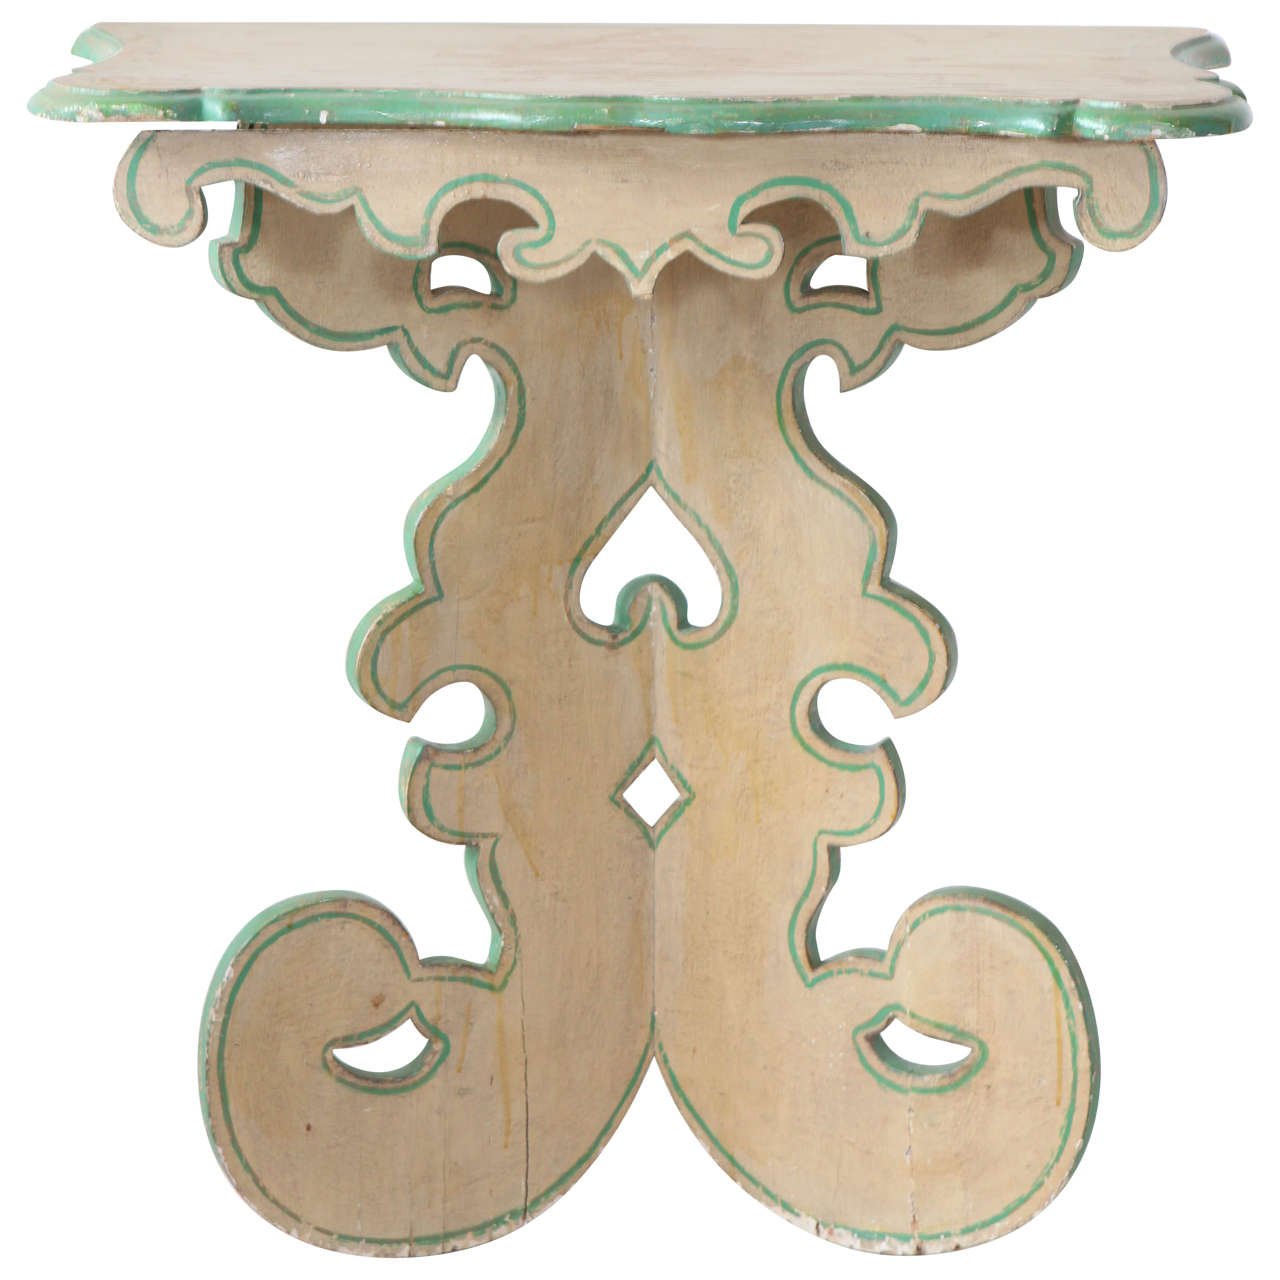 Ornate Italian Carved Green and White Wall Mount Pedestal